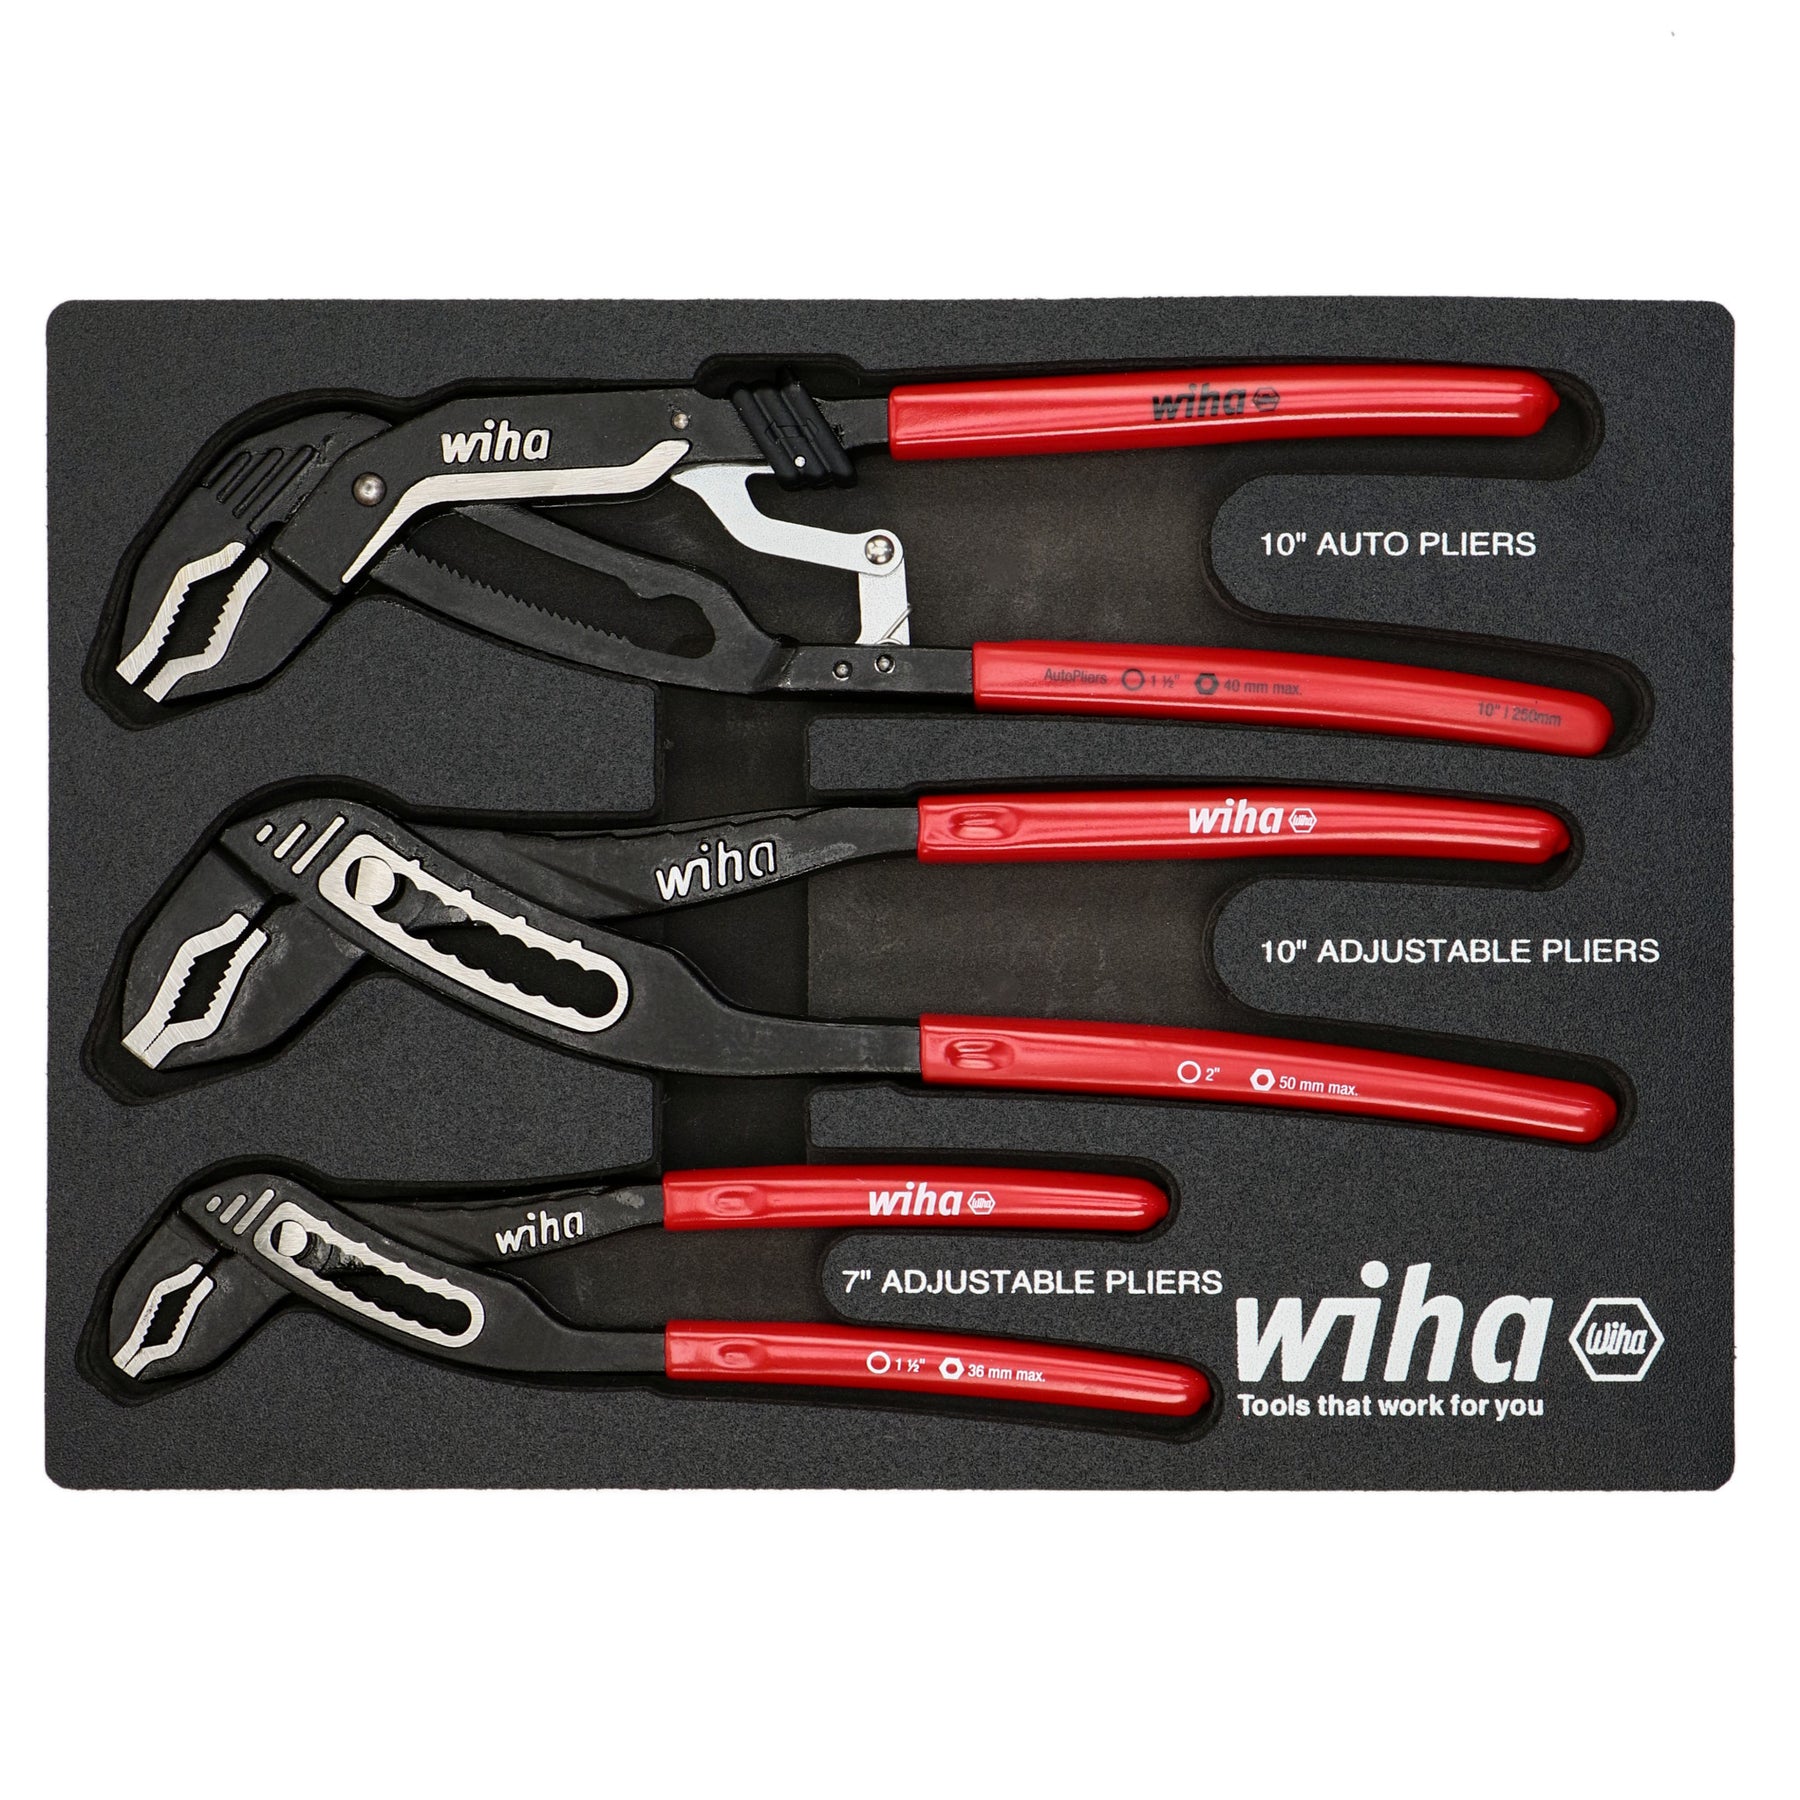 Wiha 34690 3 Piece Classic Grip V-Jaw Tongue and Groove Pliers Tray Set